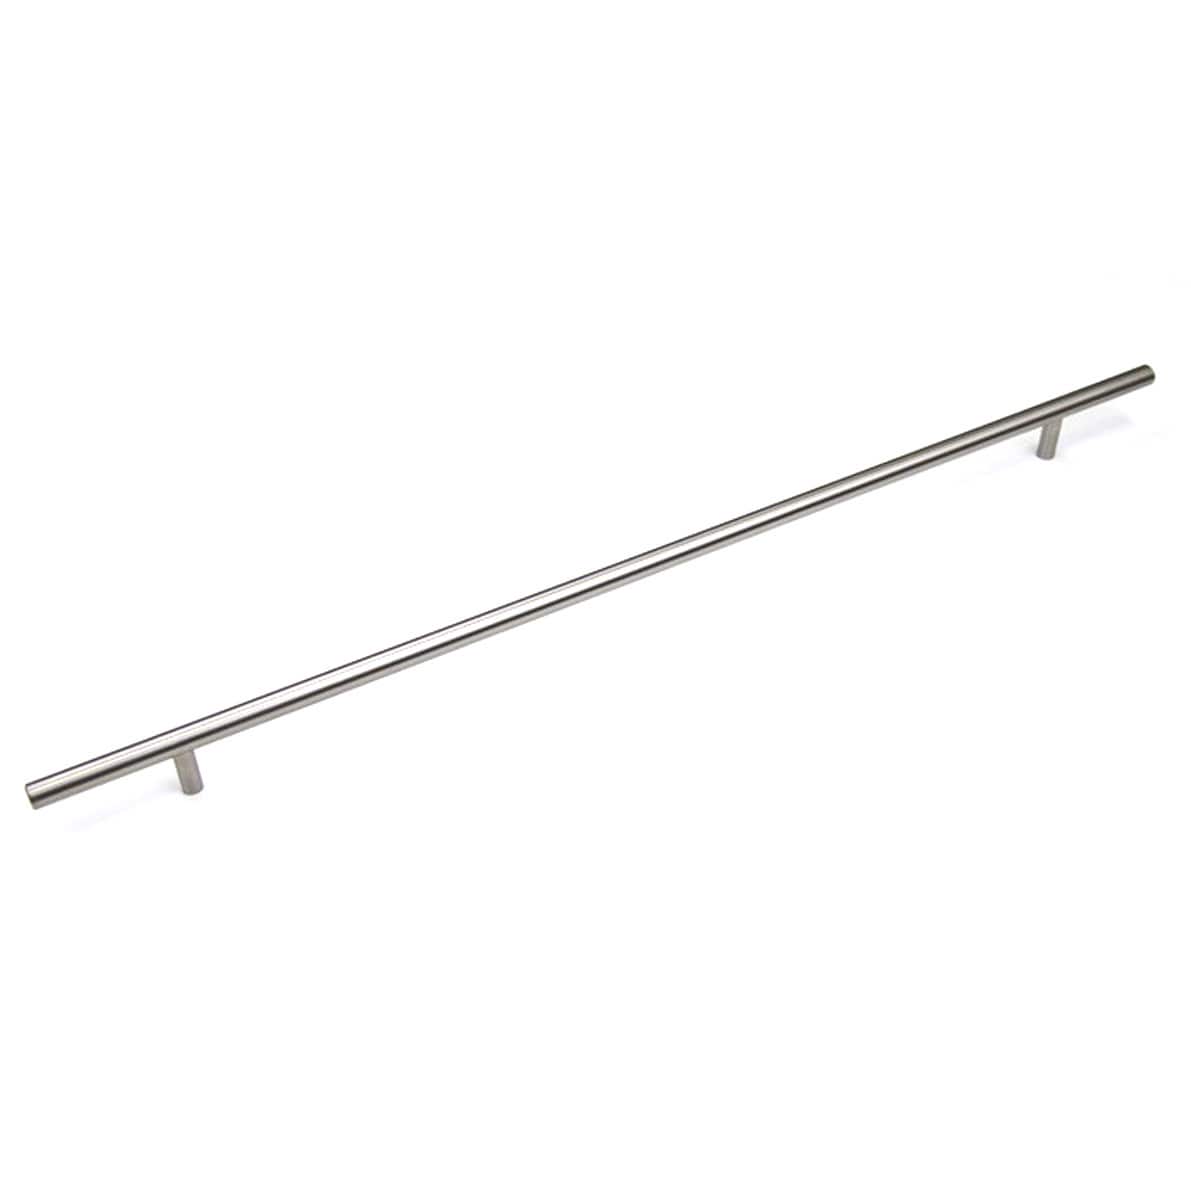 24" Solid Stainless Steel Cabinet Bar Pull Handles 24-inch (600mm) 100-percent Solid Stainless Steel Cabinet Bar Pull Handles 24-inches (Set of 4) - image 1 of 4